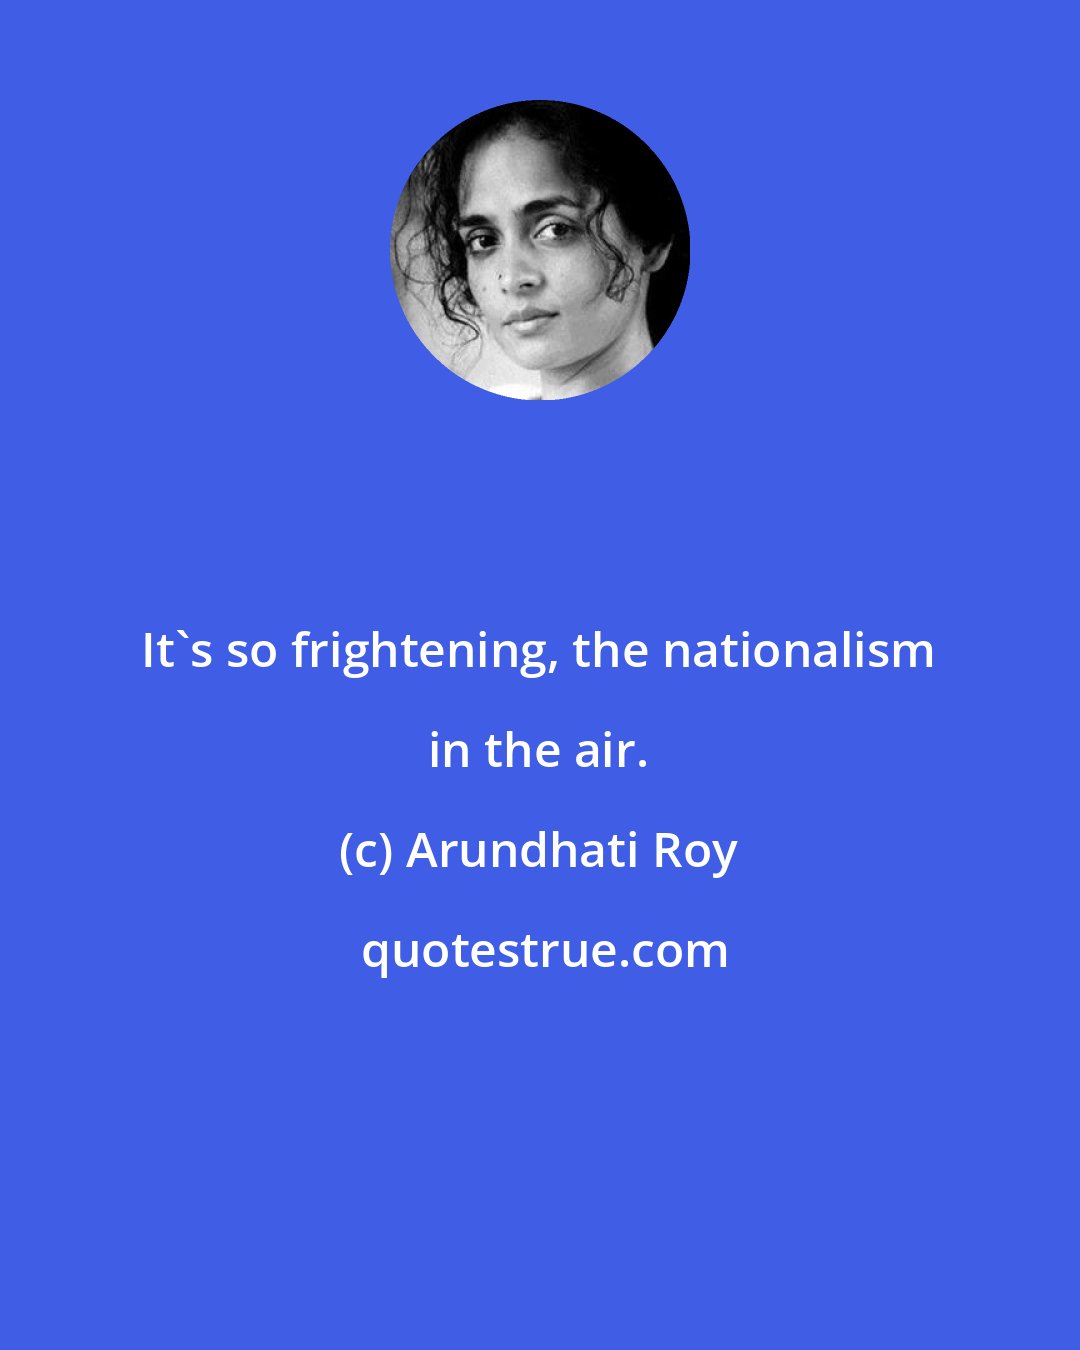 Arundhati Roy: It's so frightening, the nationalism in the air.